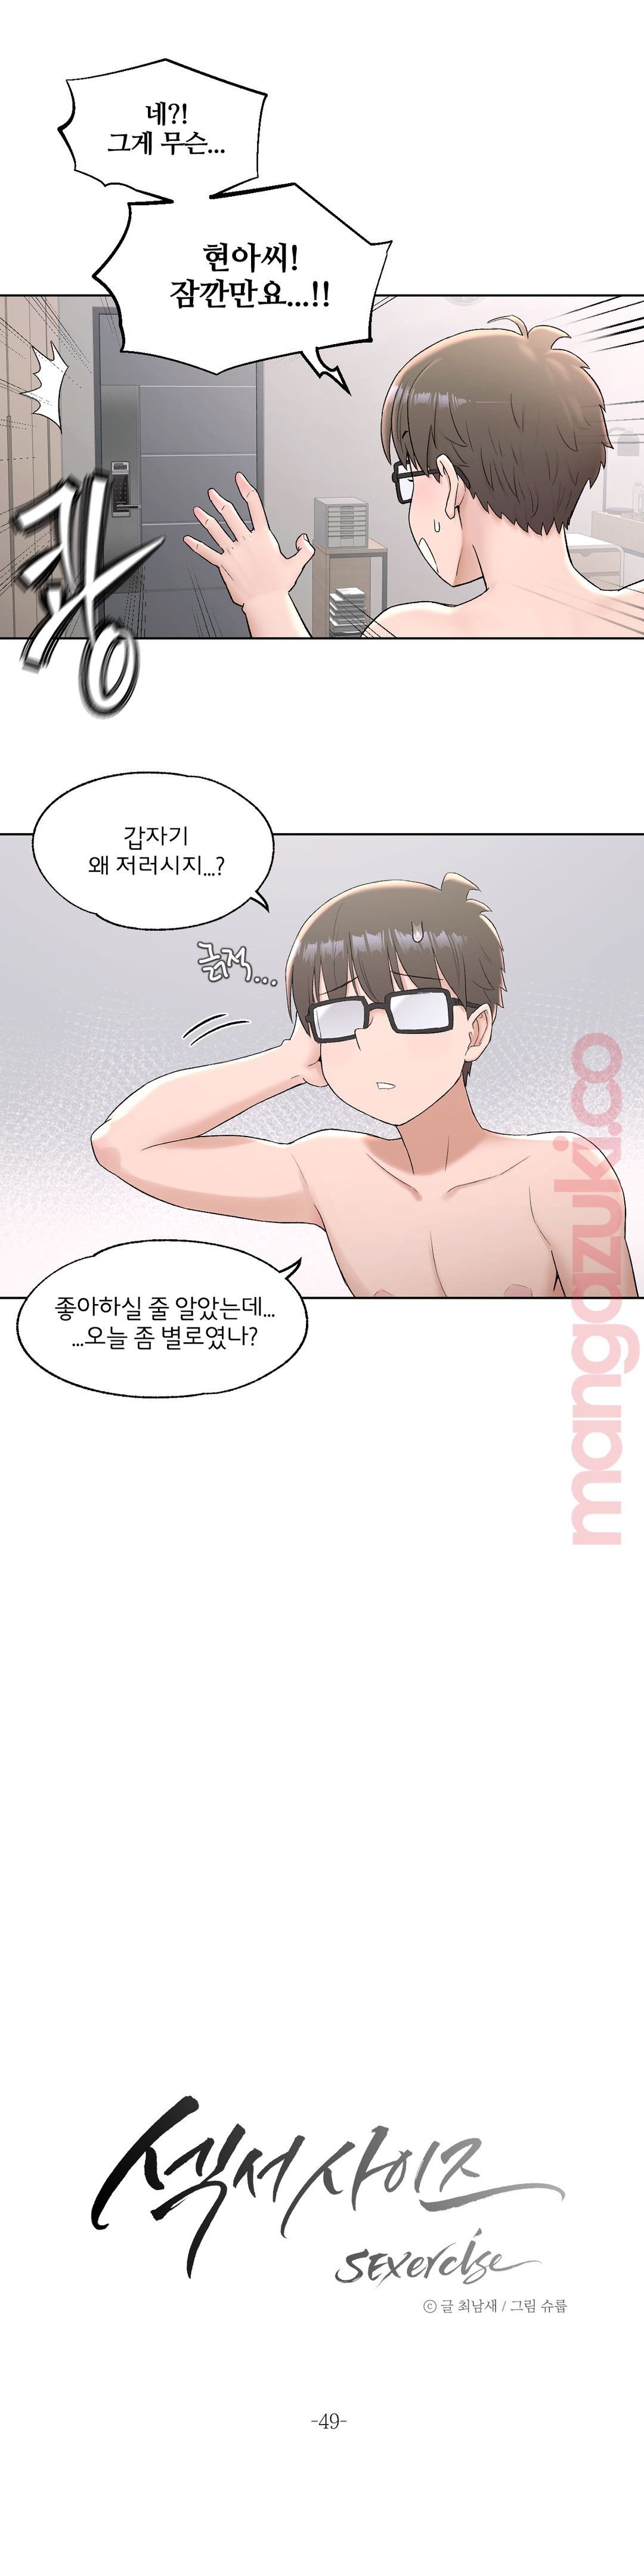 Sexercise Raw - Chapter 49 Page 6